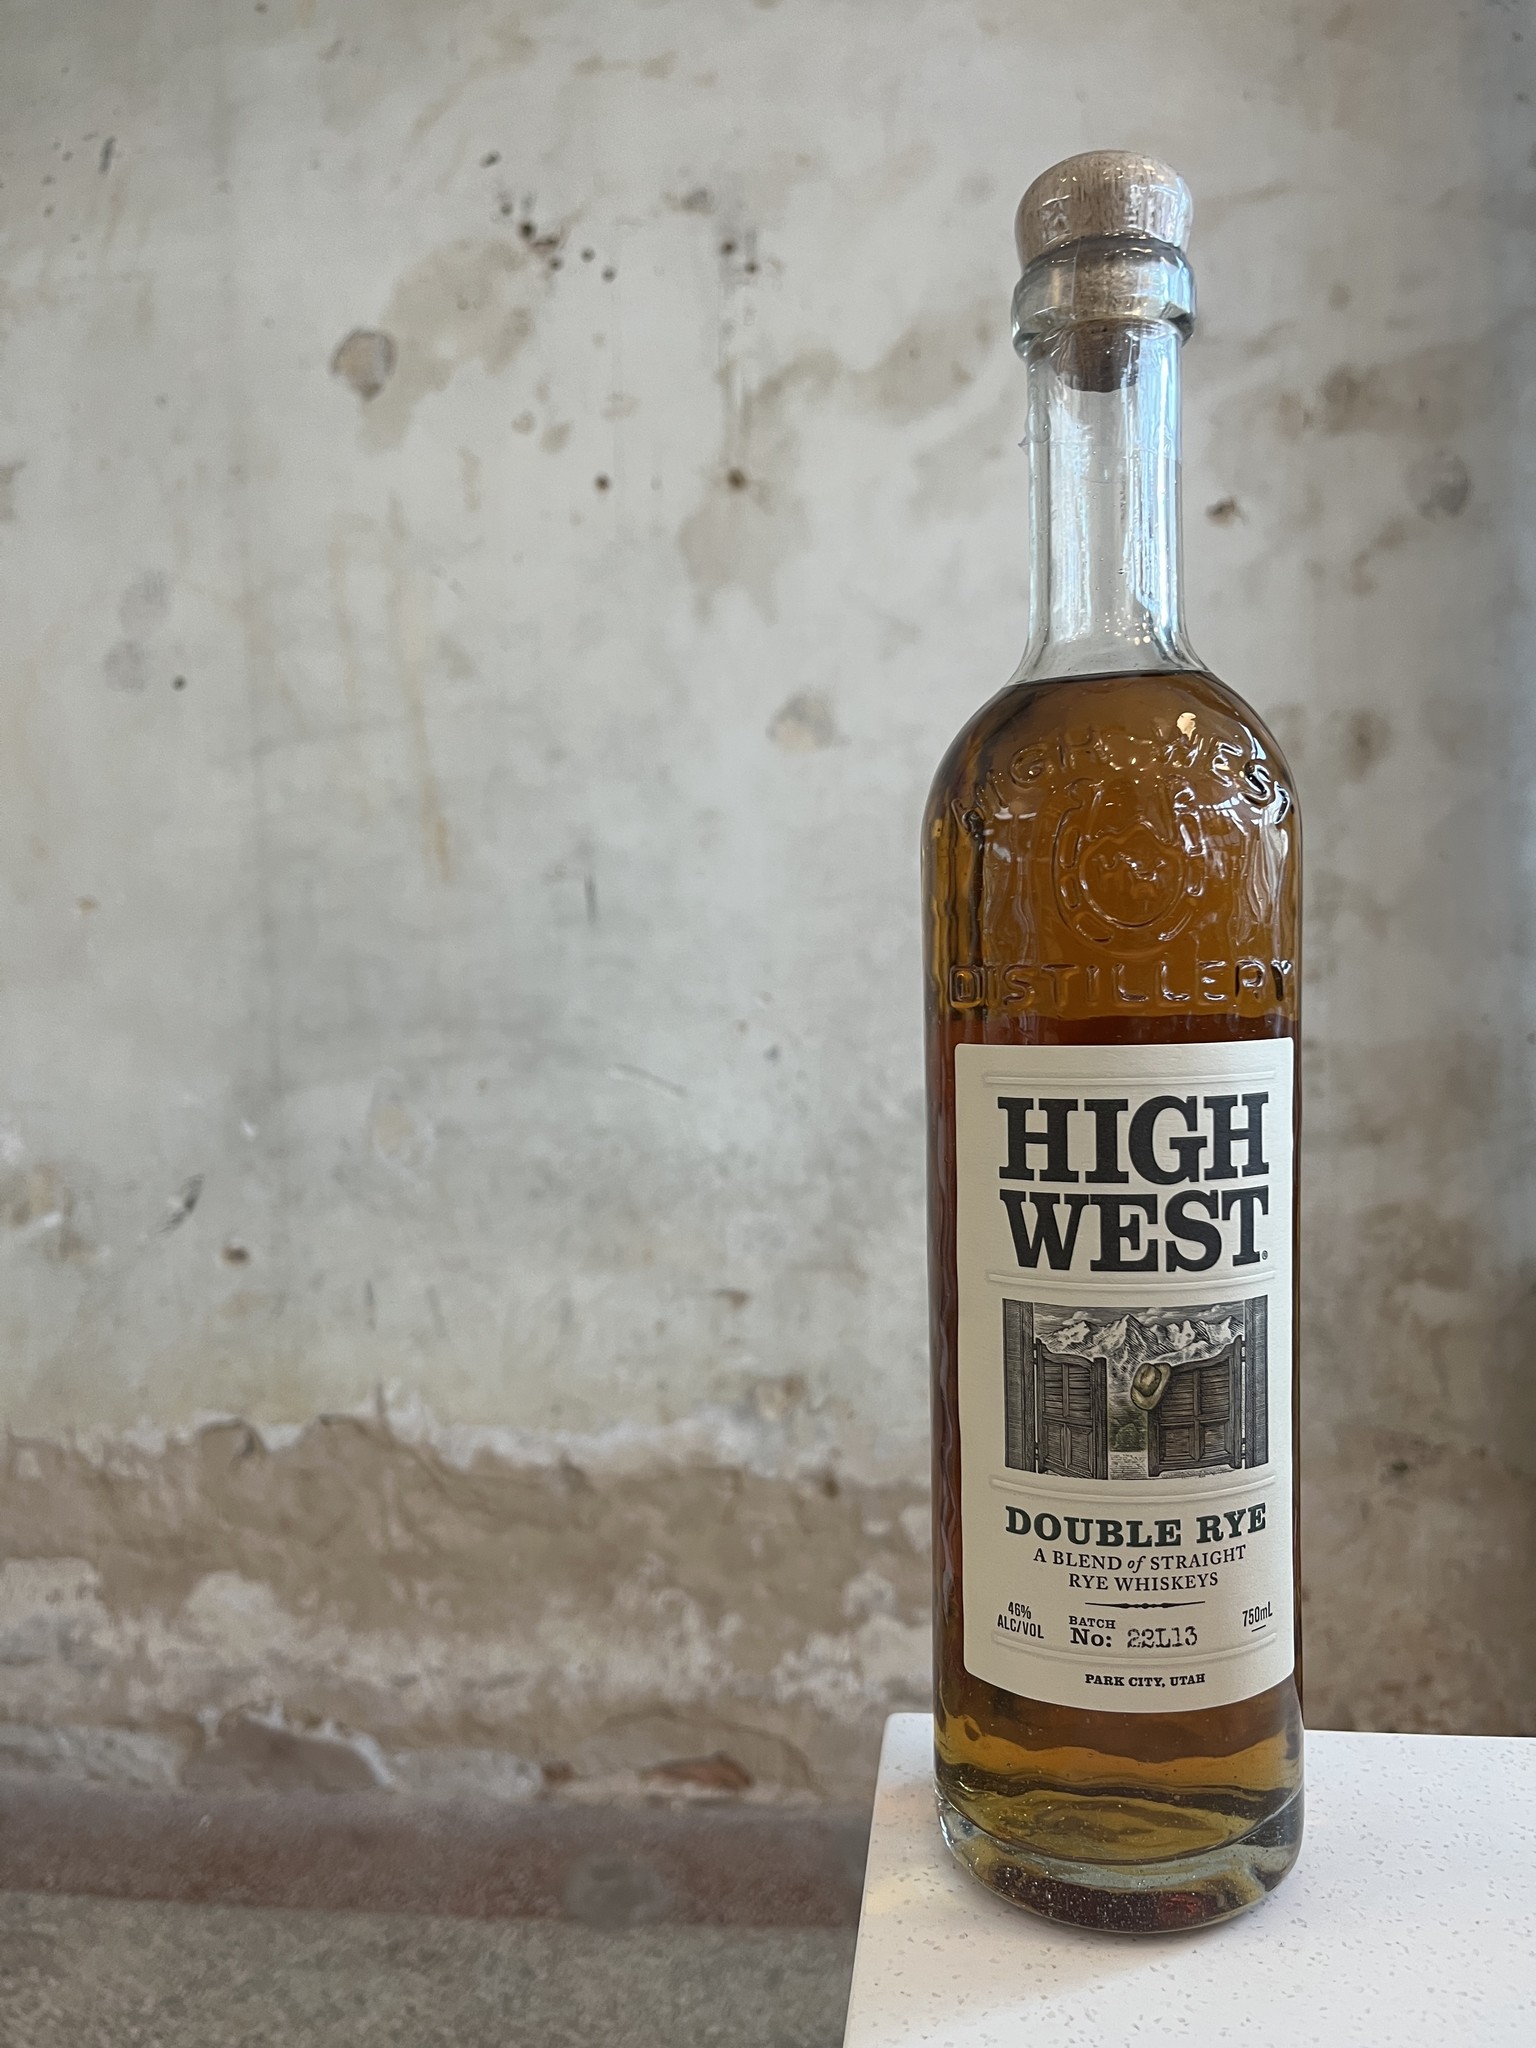 High West High West Double Rye